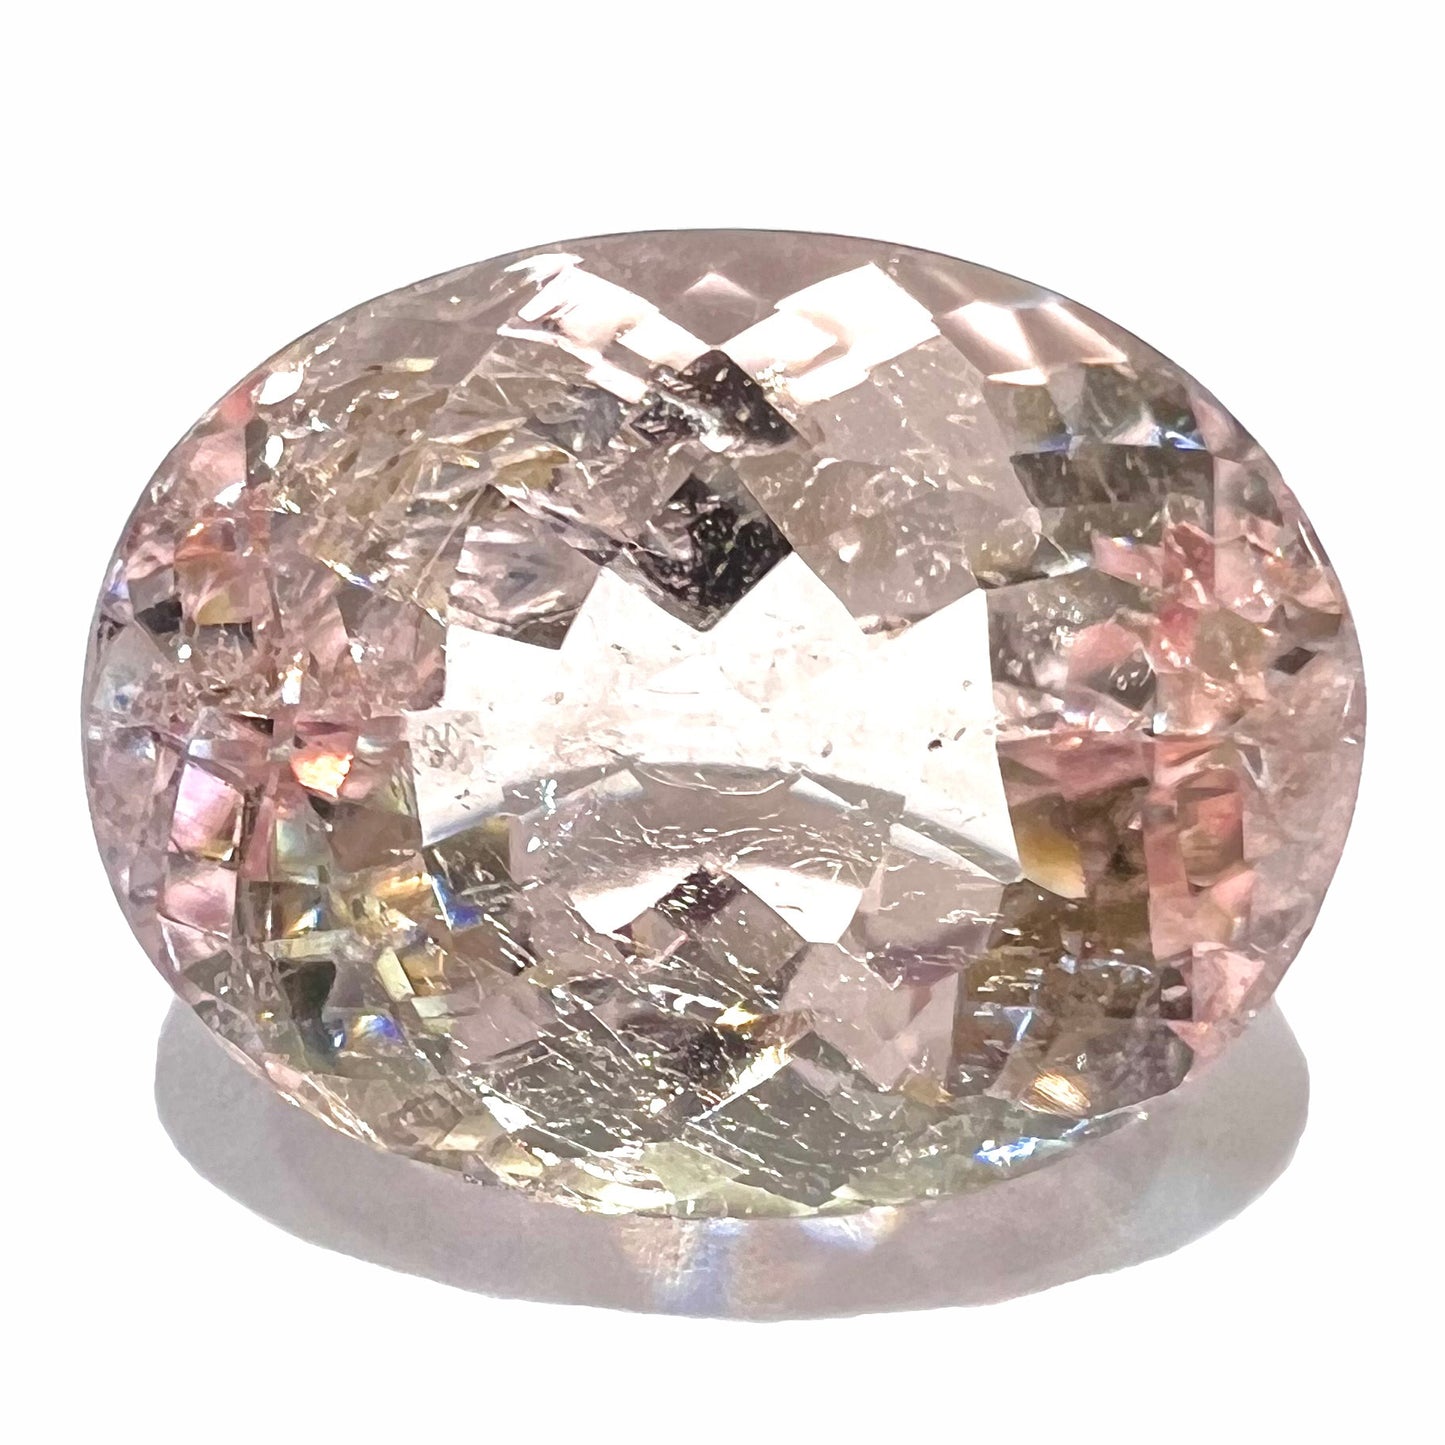 A loose, faceted oval cut pink morganite stone weighing 14.84 carats.